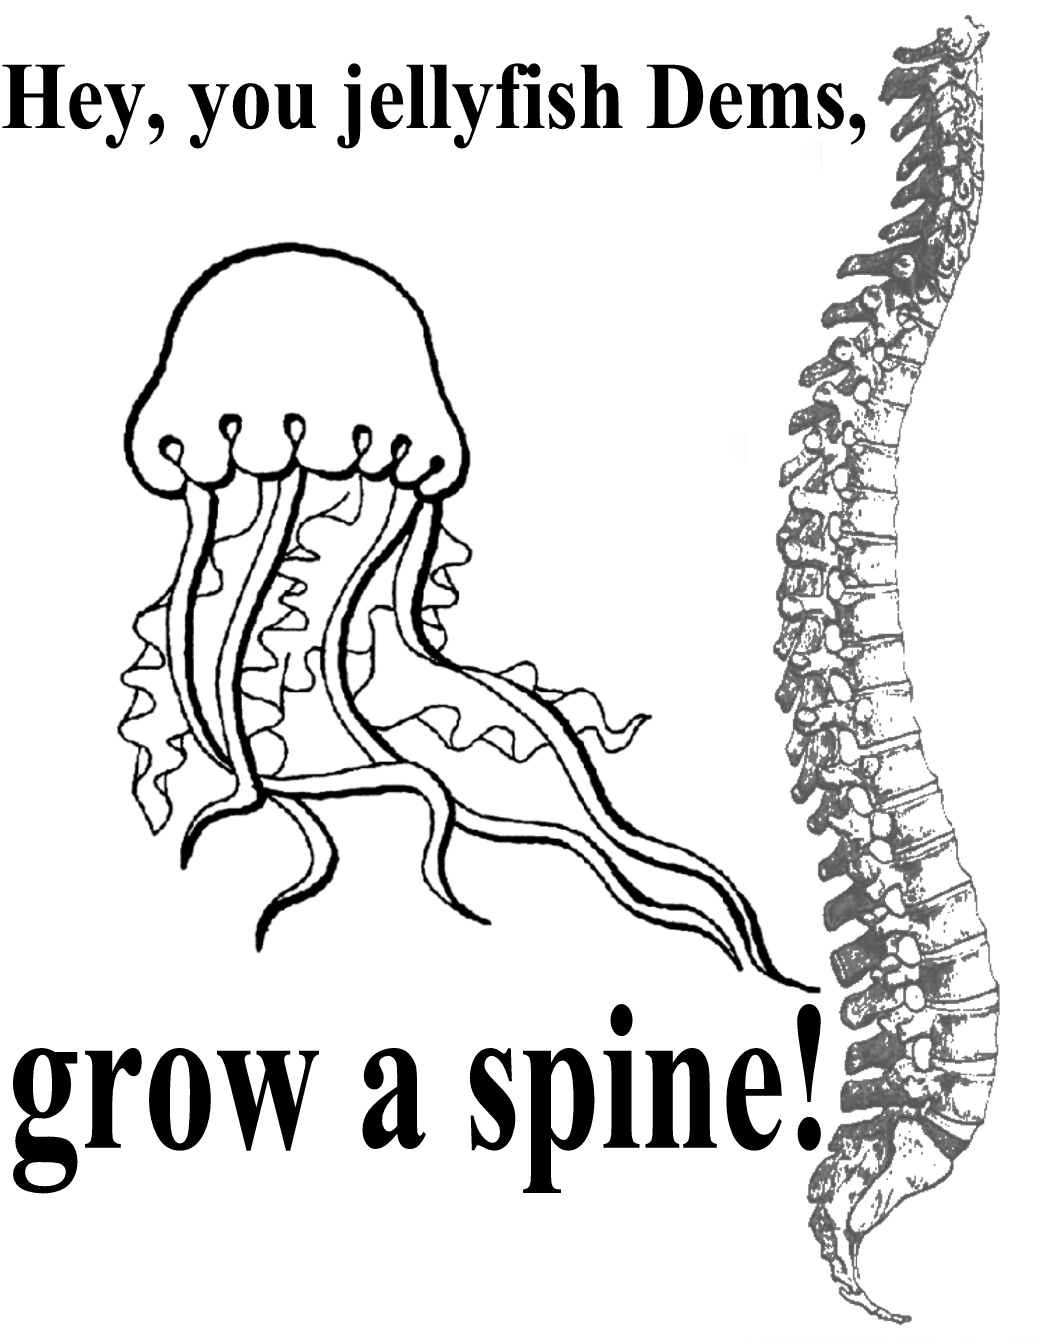 Hey, you jellyfish Dems, grow a spine! (design copyright 2007 by Katharine O'Moore-Klopf)